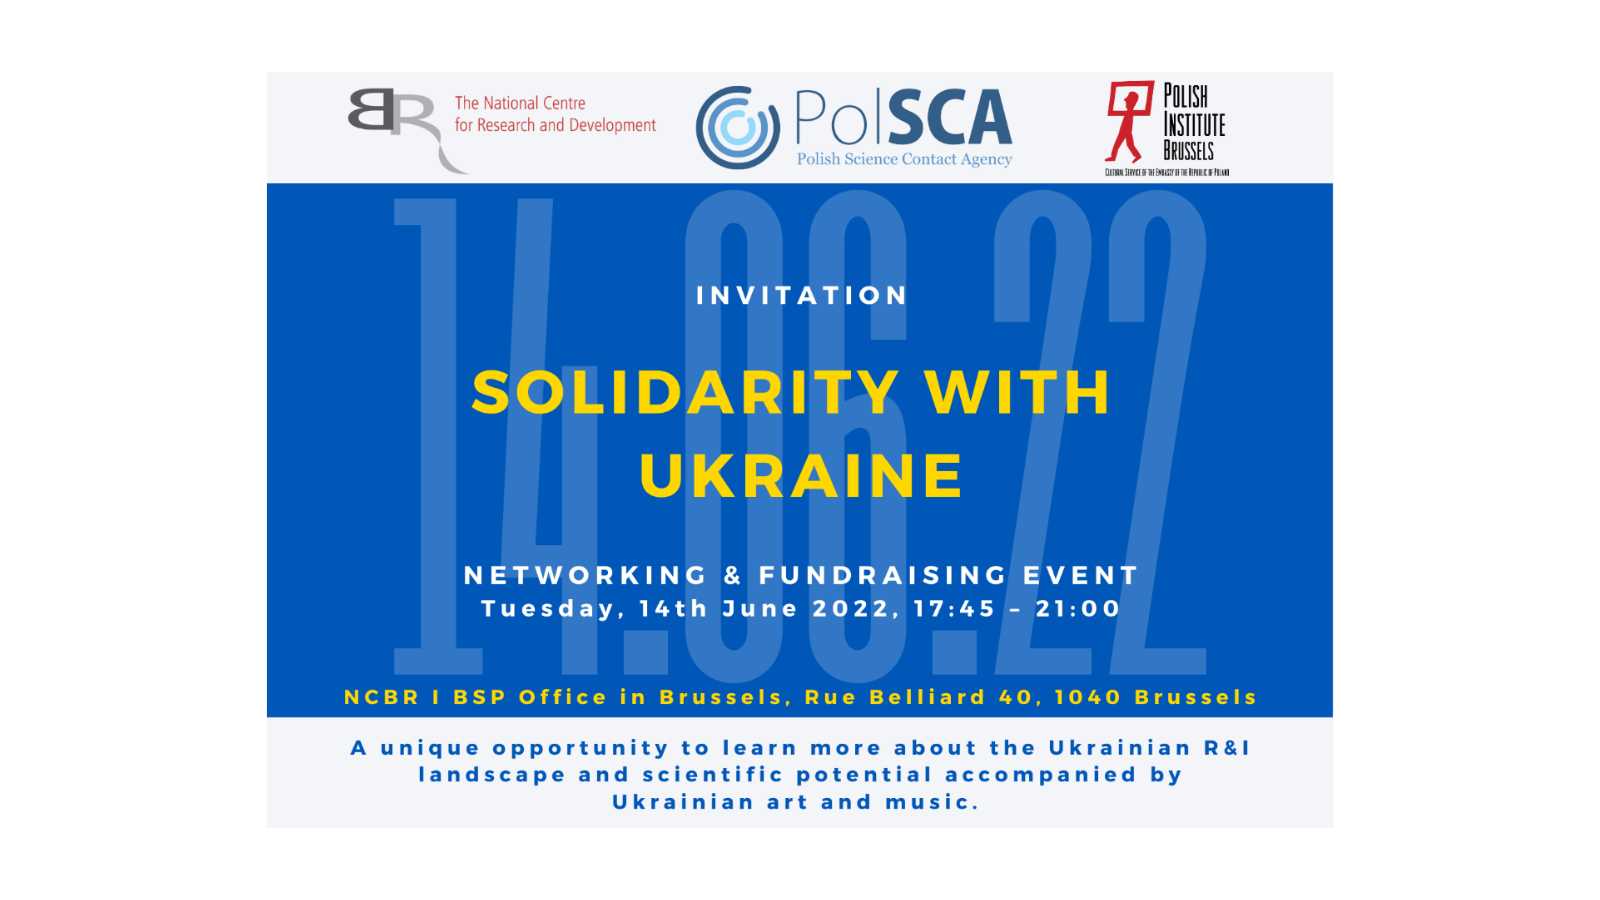 'Solidarity with Ukraine' networking & fundraising event